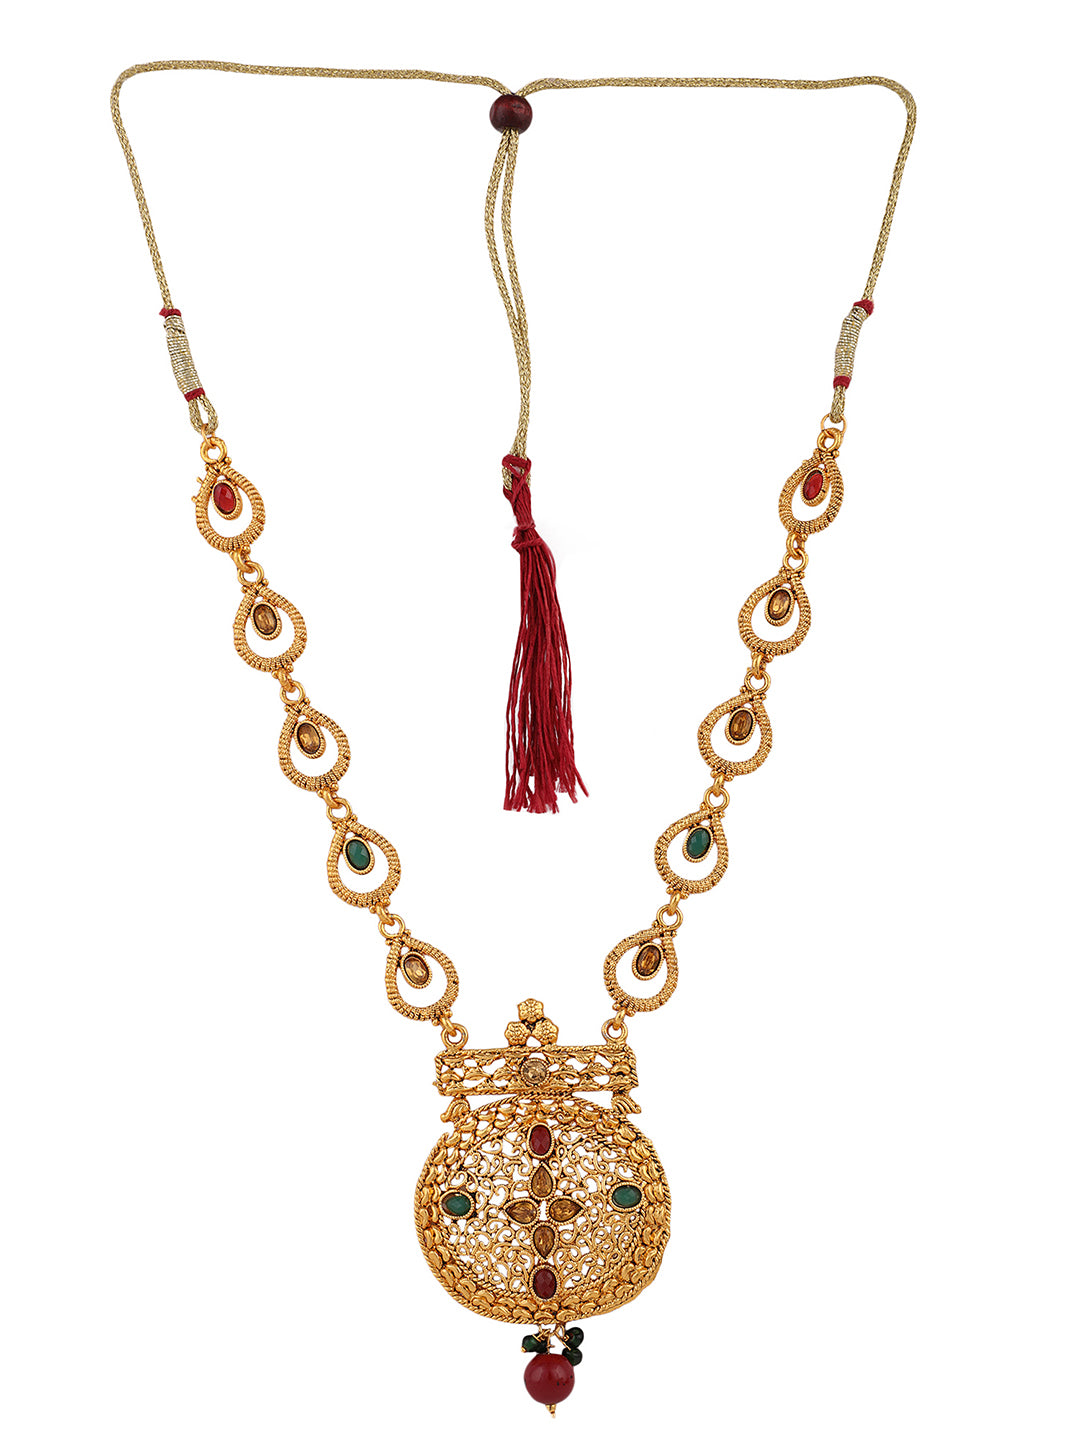 Women's Traditional Gold Plated Stone And Pearl Brass Necklace With Earring - Anikas Creation